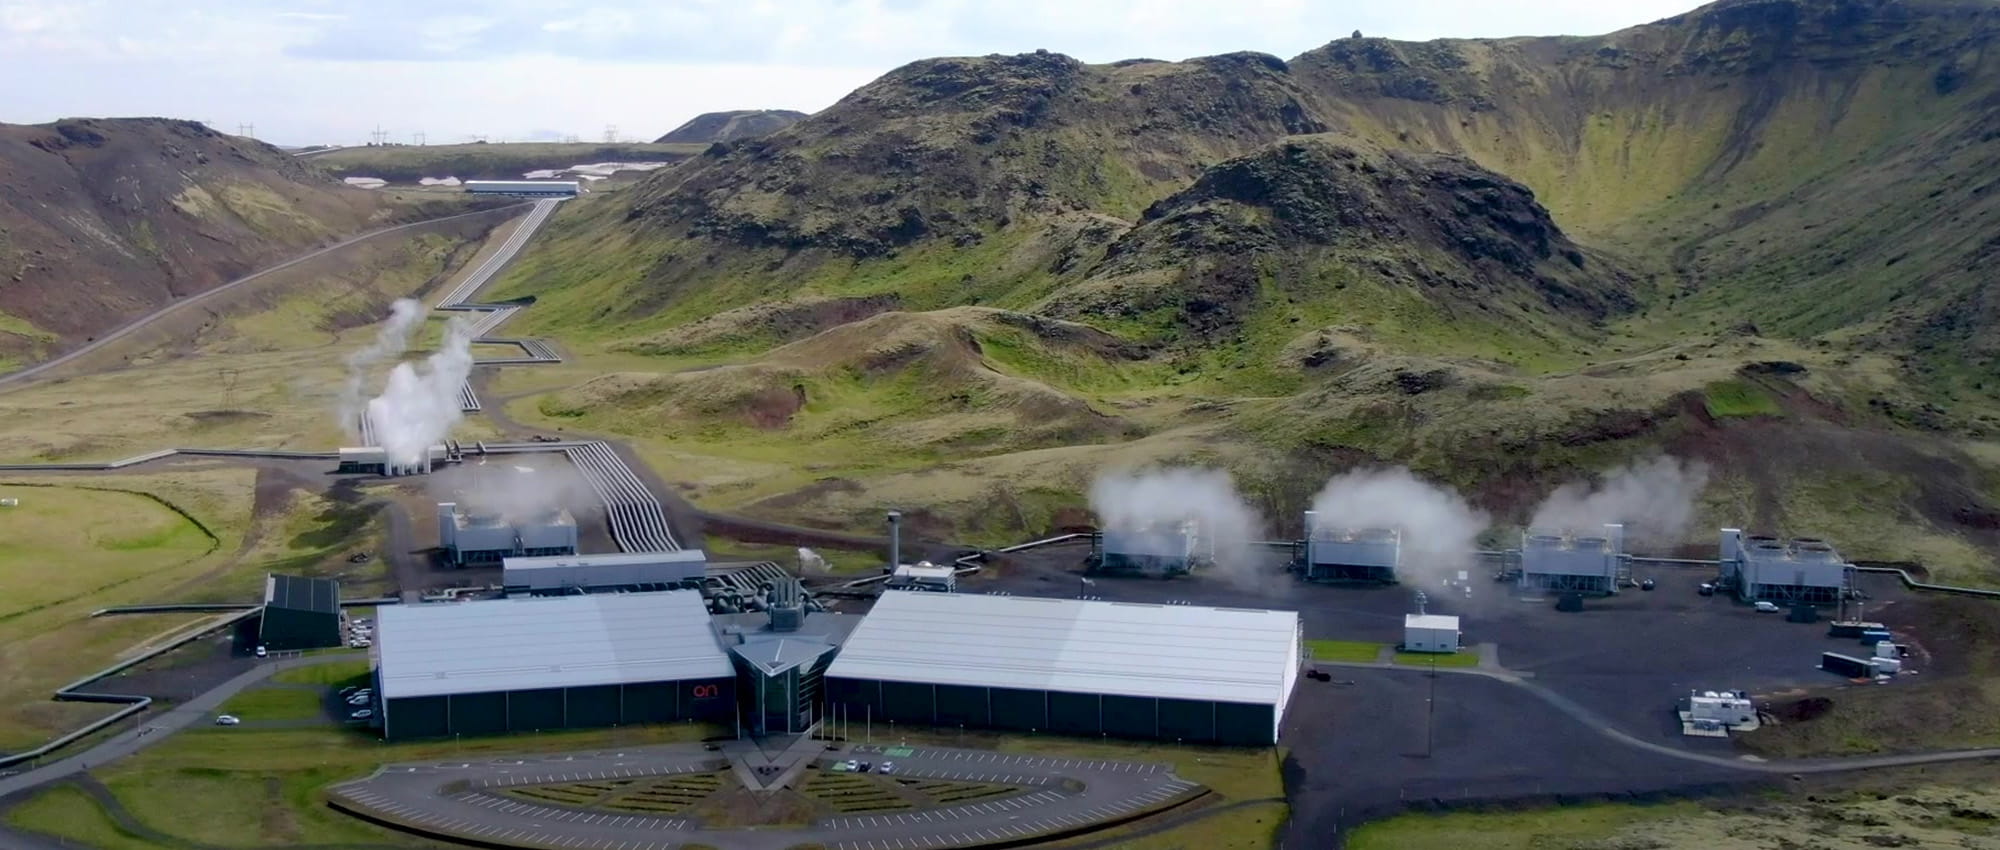 Video teaser: Iceland landscape with building facility